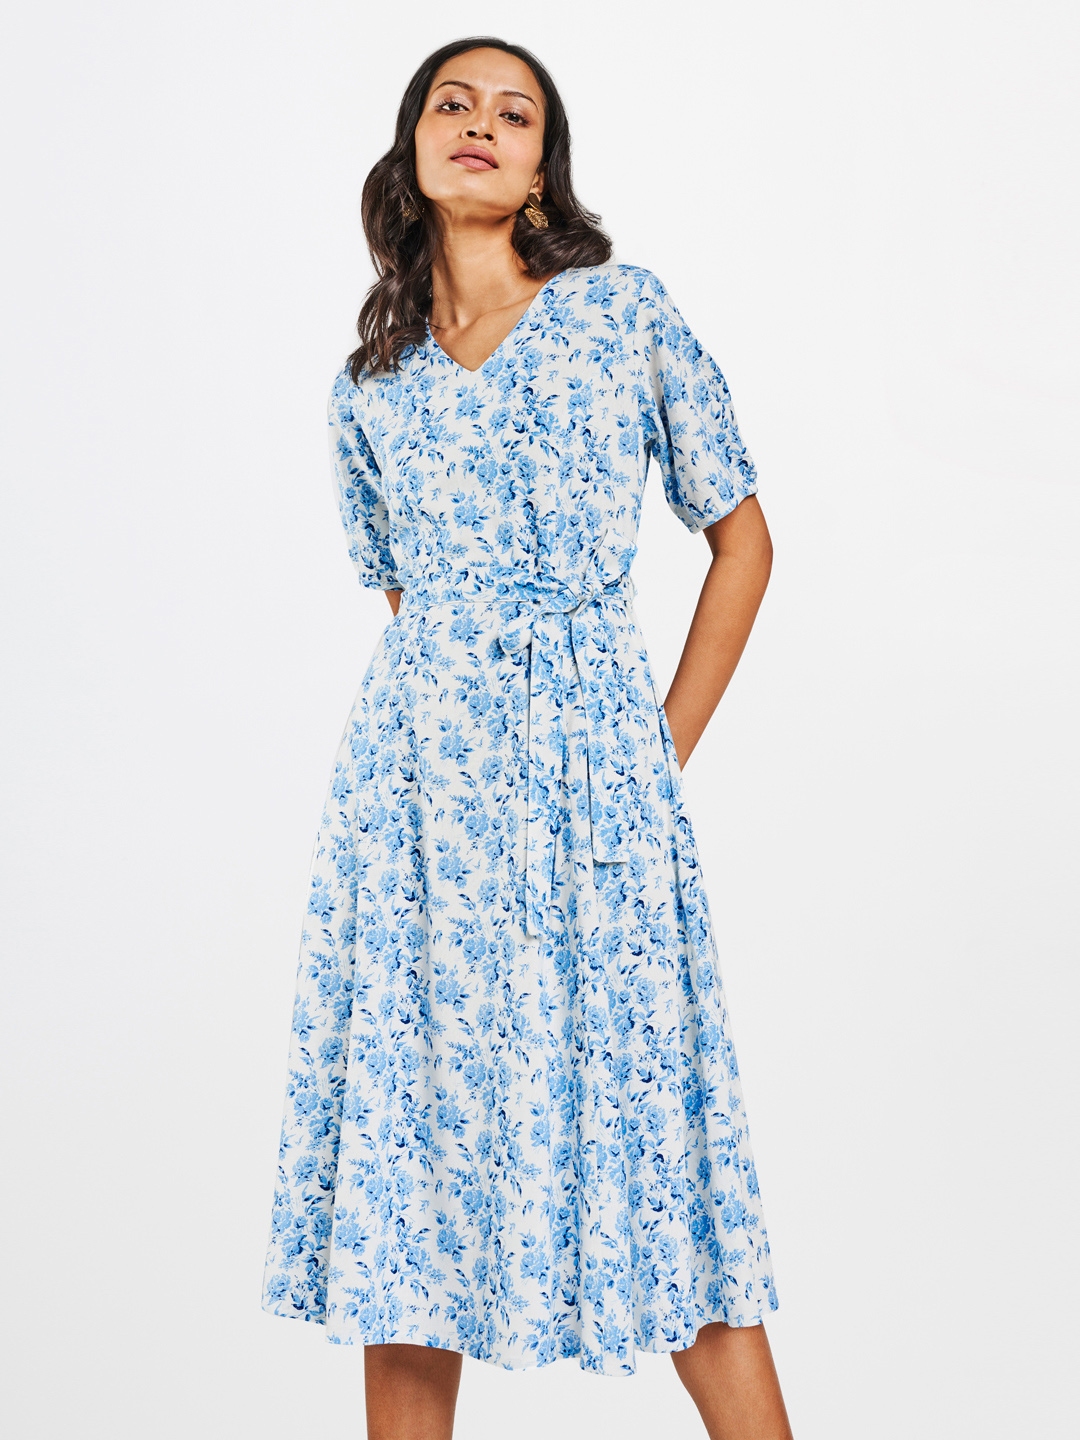 Buy And Women White And Blue Floral Printed V Neck Dress With Waist Tie Up Dresses For Women 